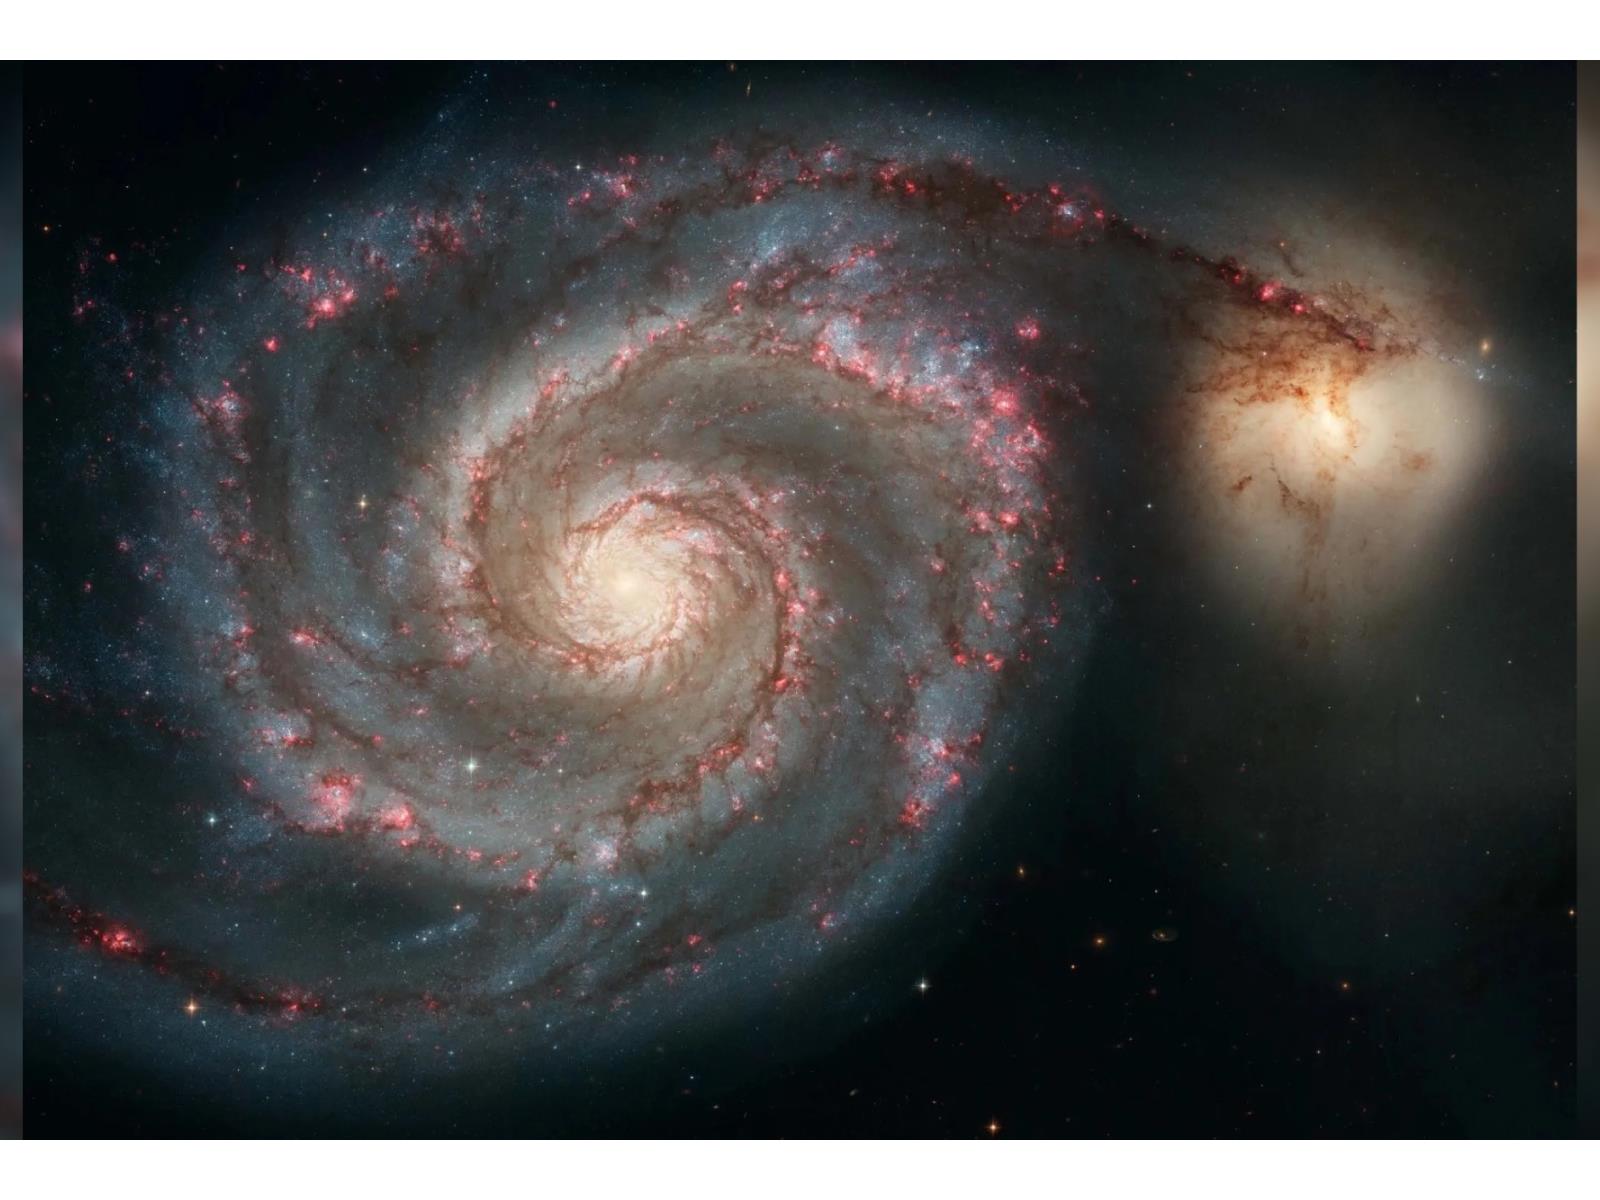 Ceers-2112: Twin galaxy of the Milky Way discovered at the edge of the  universe, Science